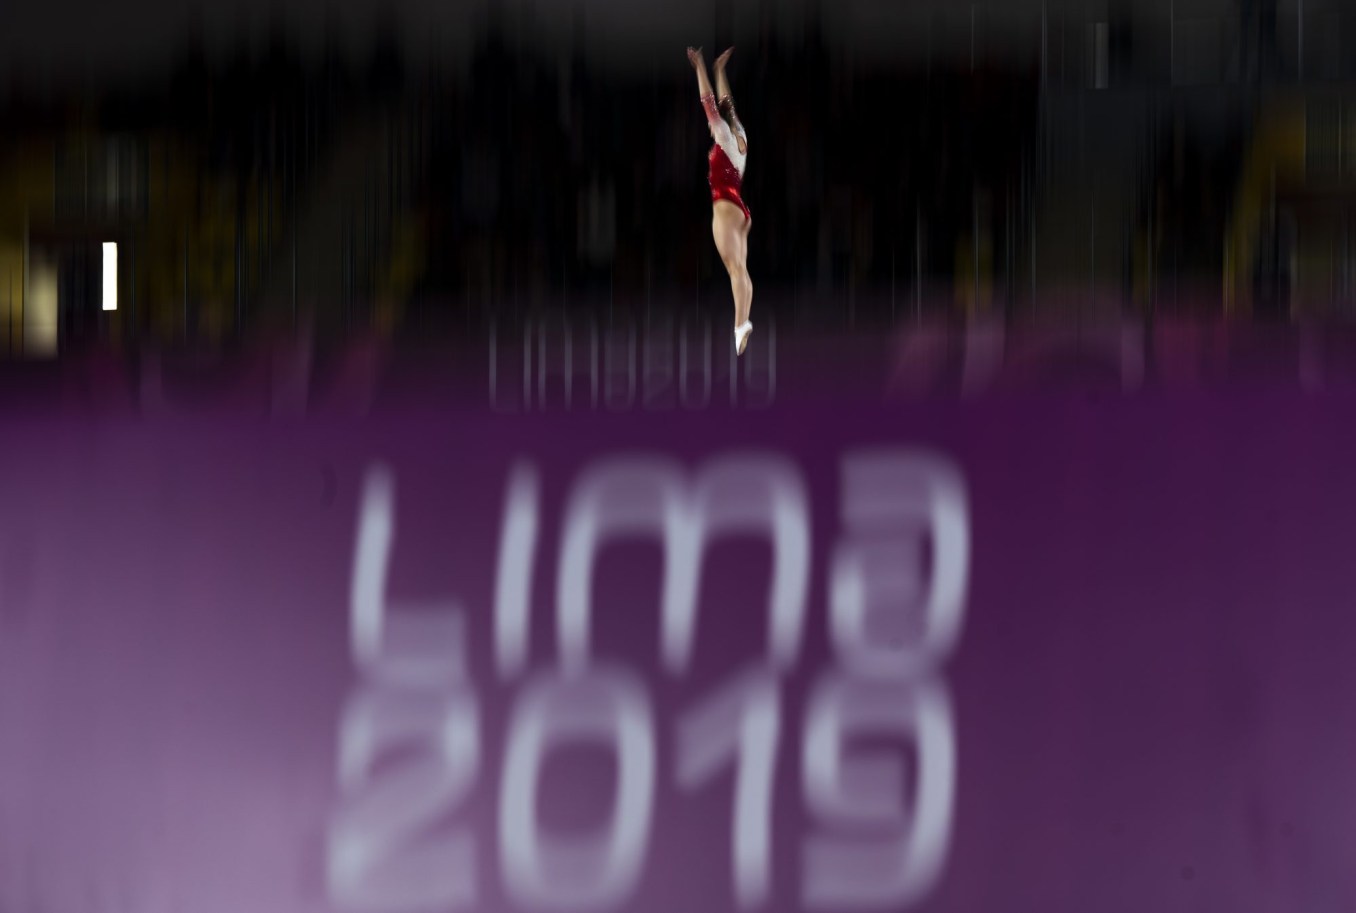 athlete in the air above a lima 2019 sign